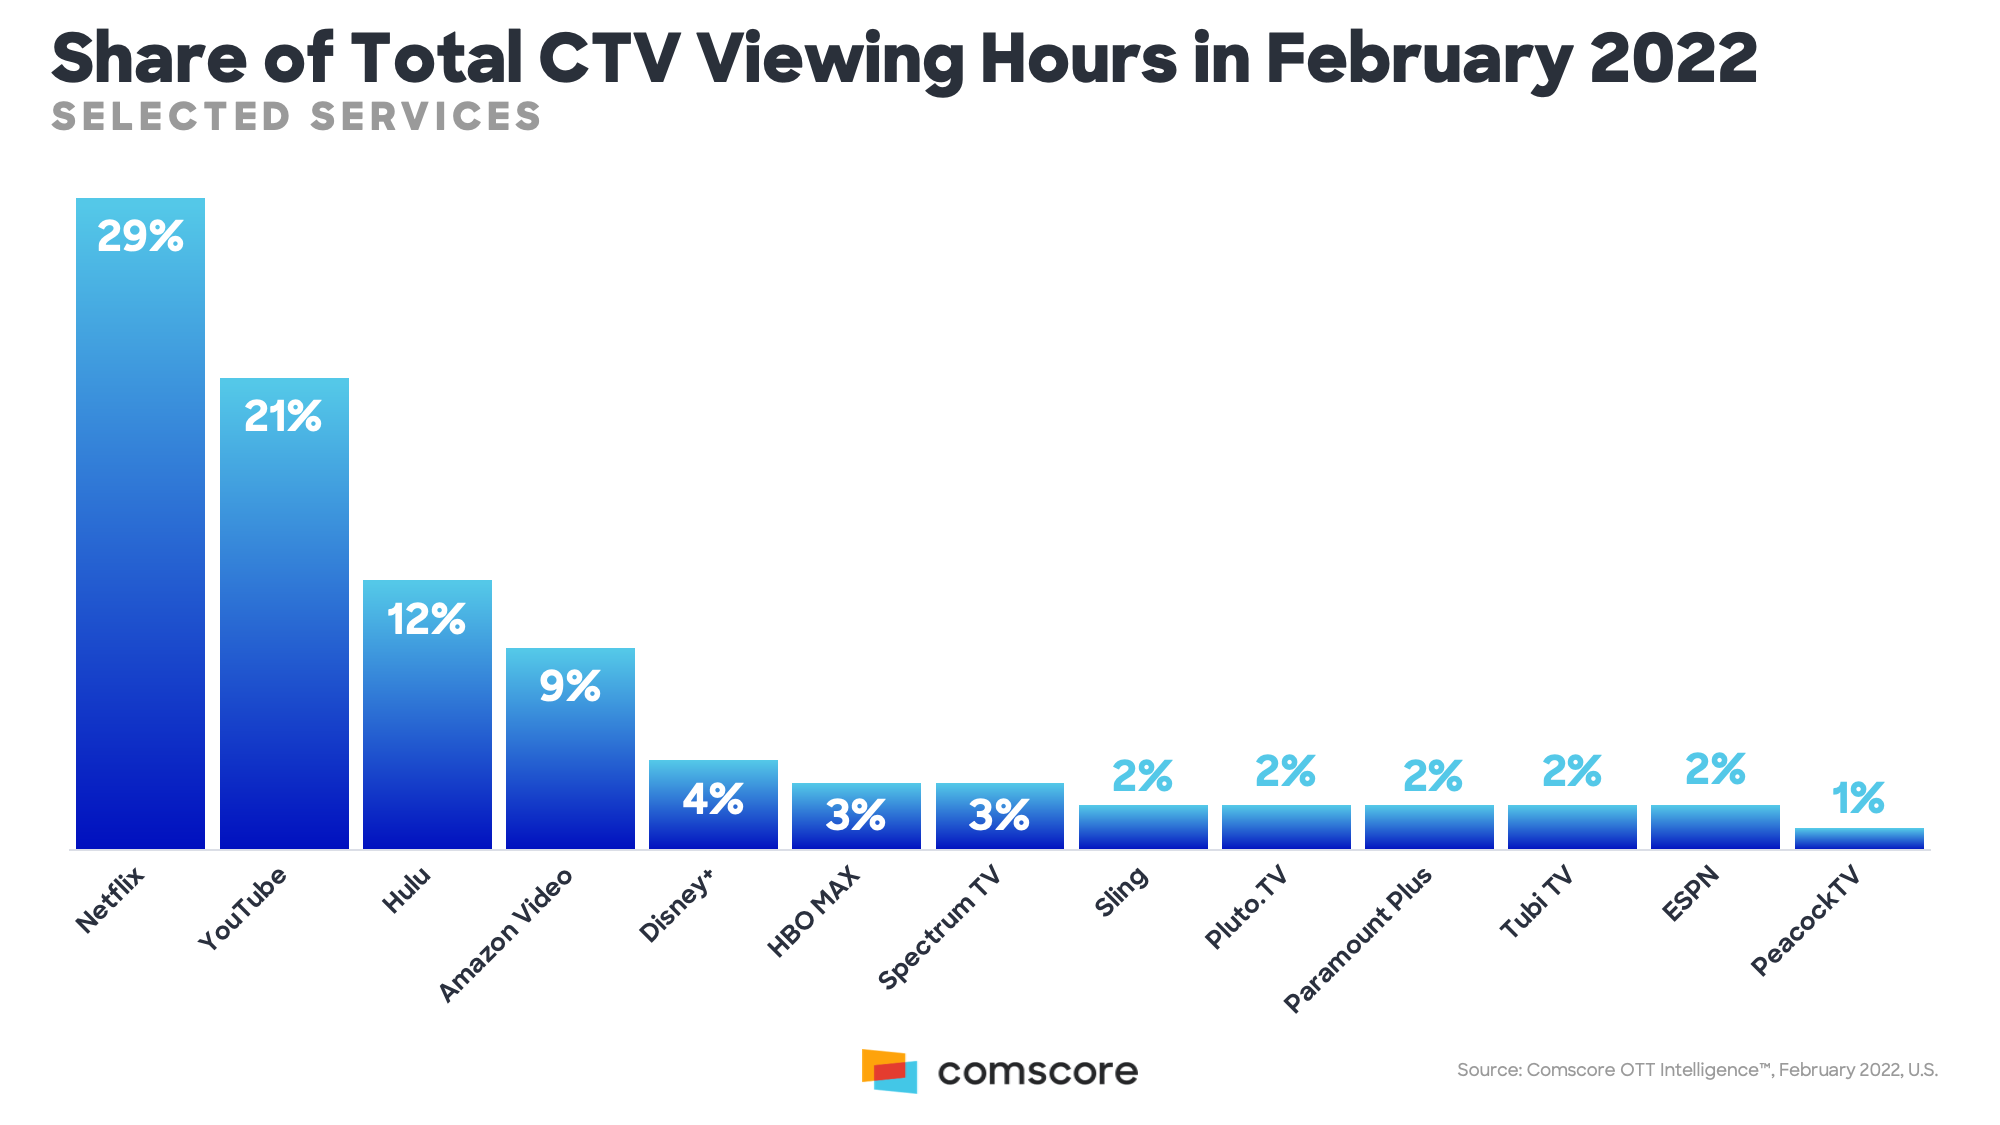 Share of Total Viewing Hours in February 2022